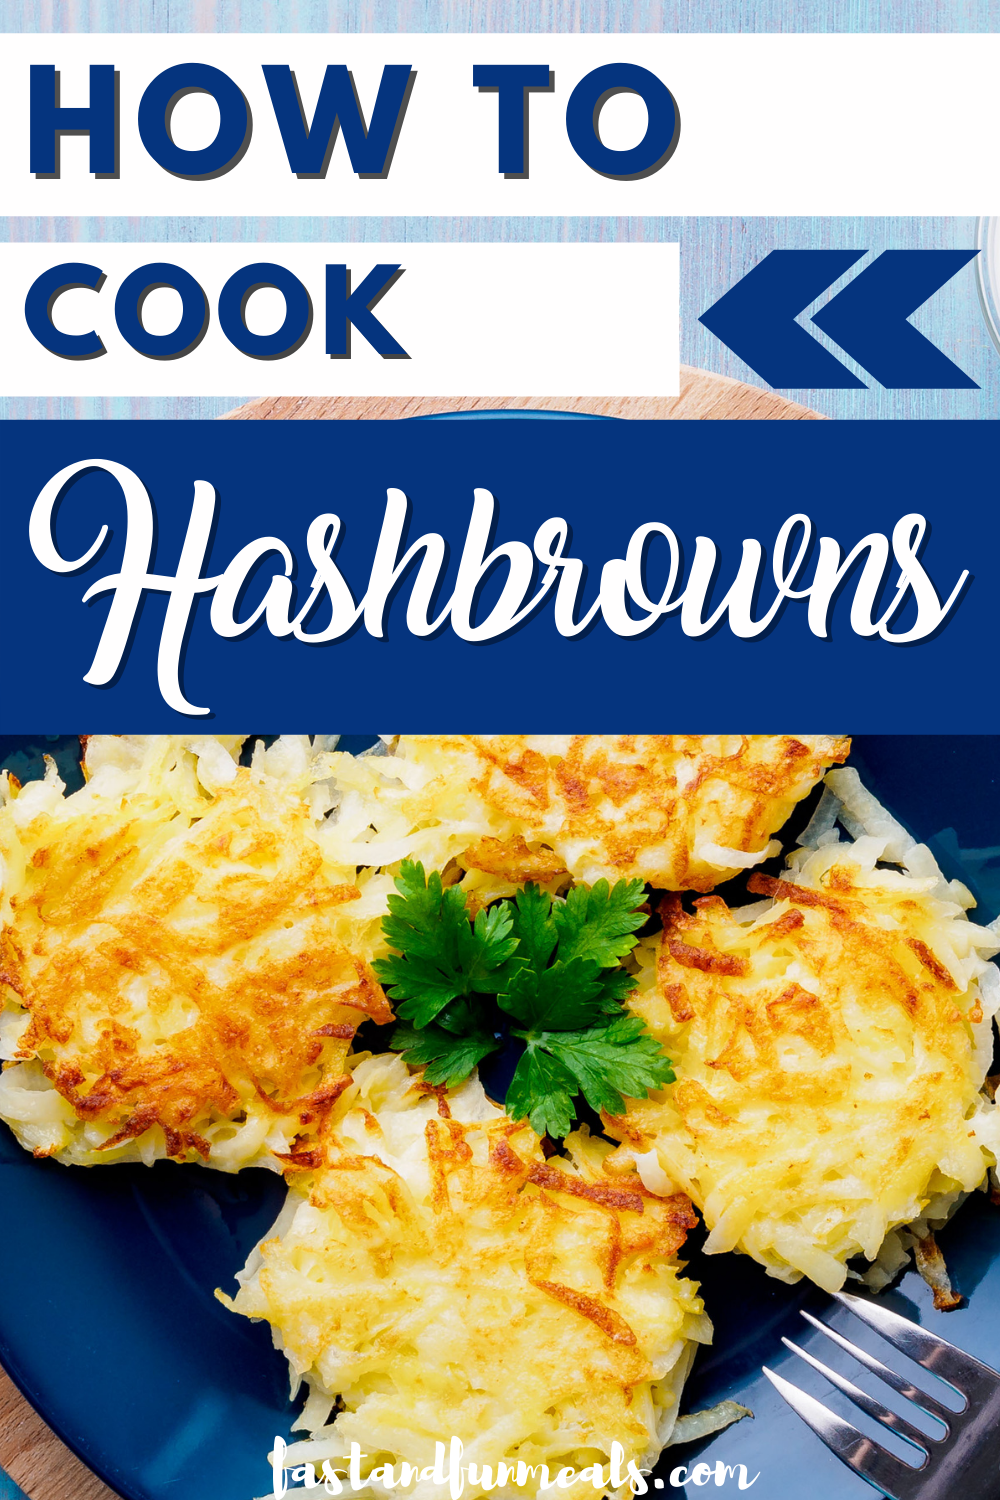 Pin showing the title How to Cook Hashbrowns